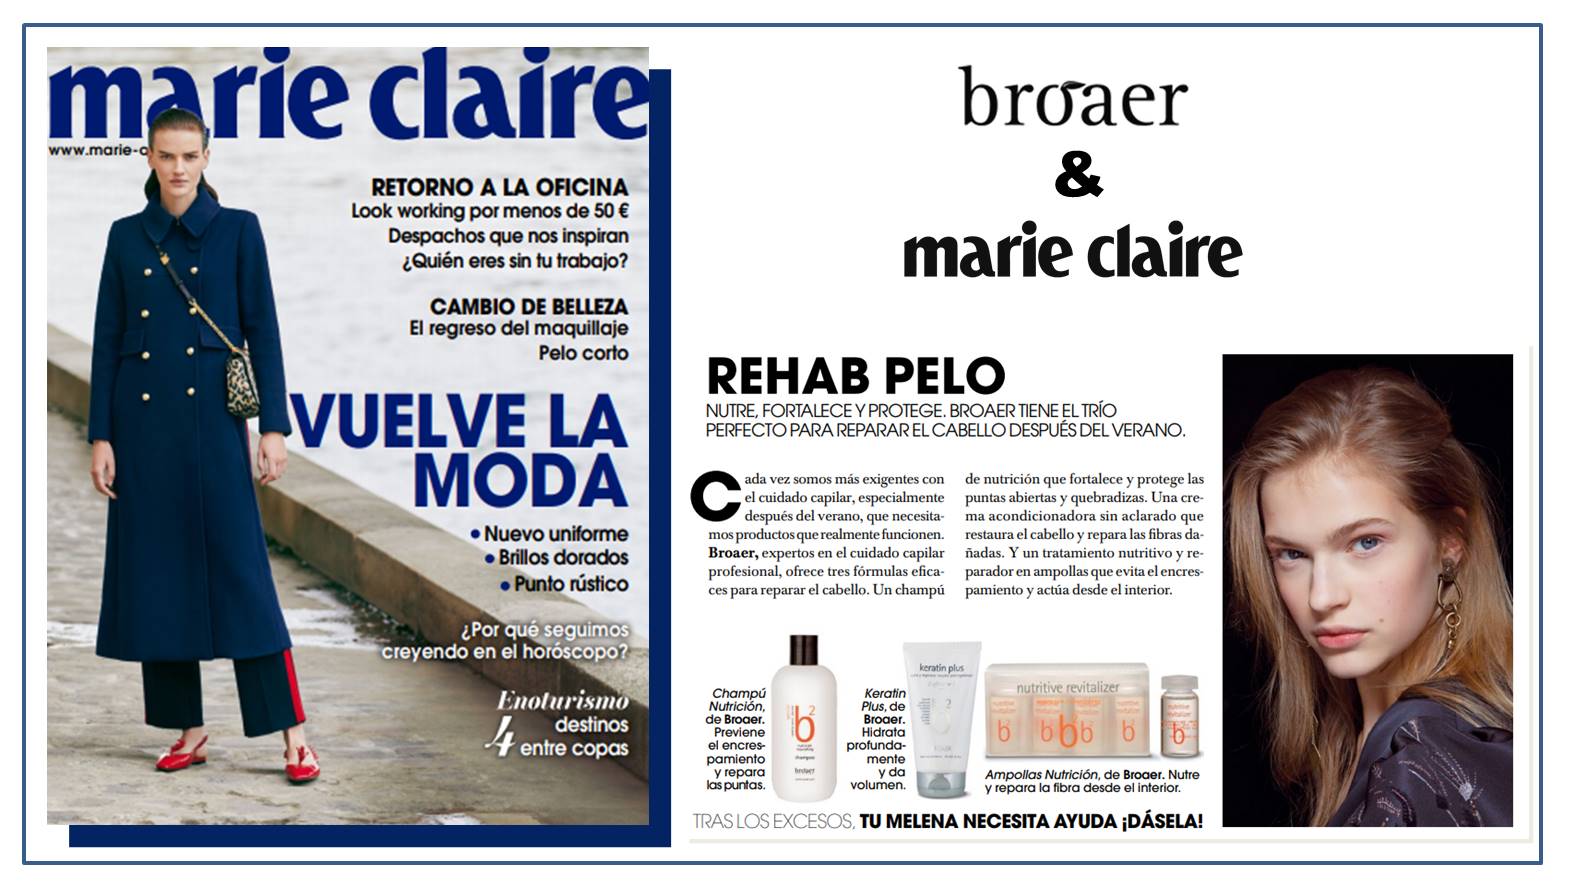 BROAER&MARIE CLAIRE